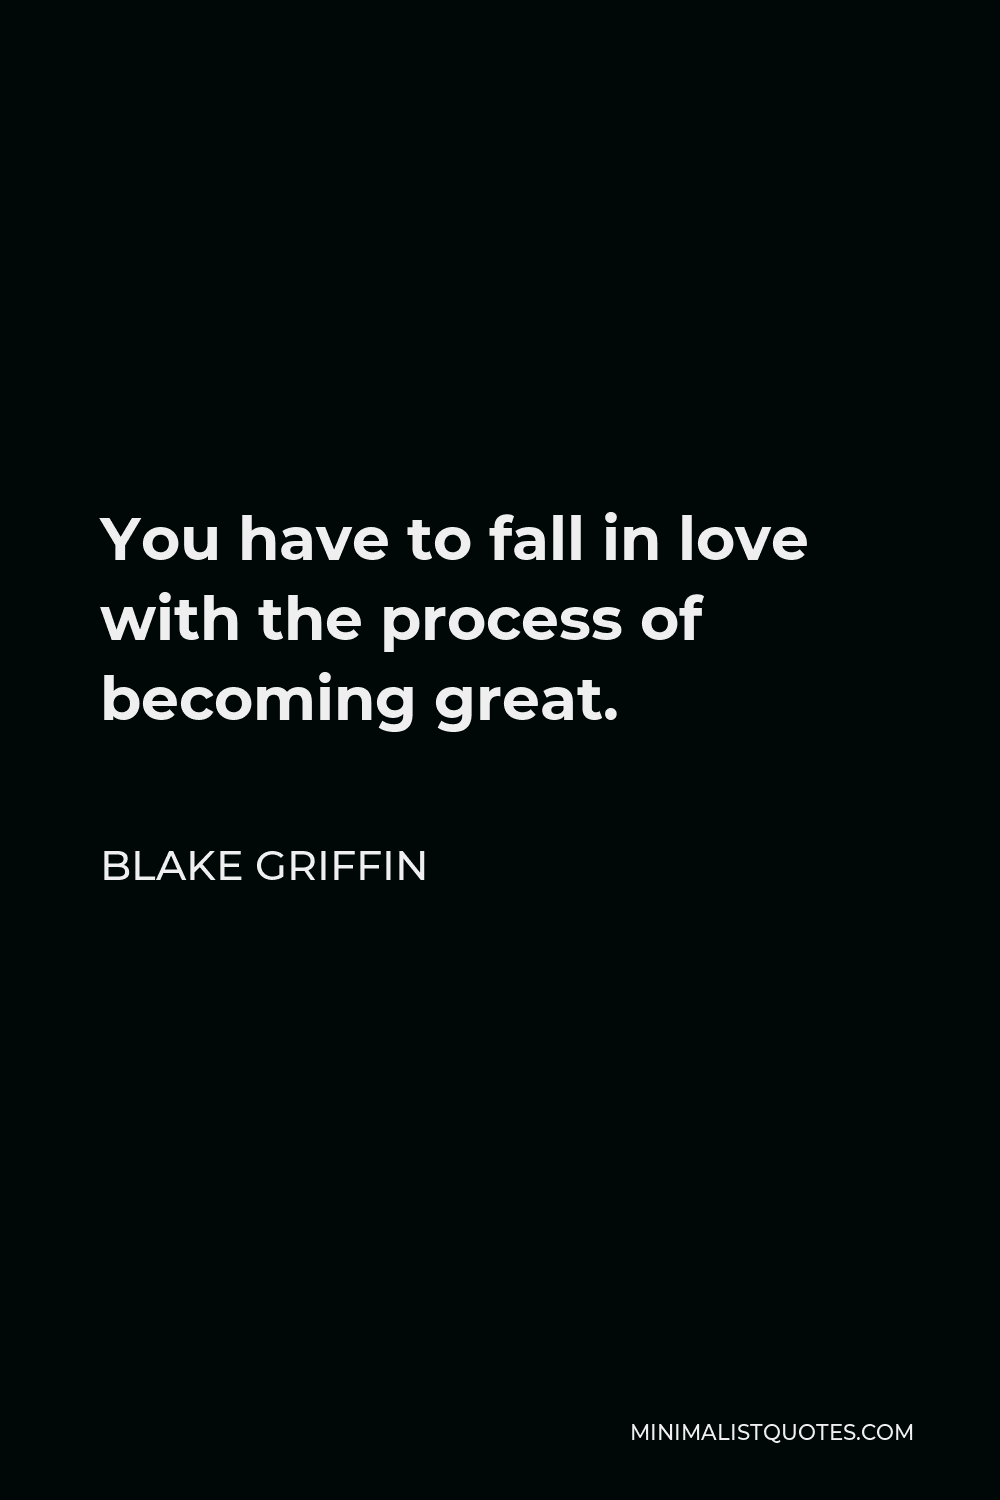 Blake Griffin Quote - You have to fall in love with the process of becoming great.